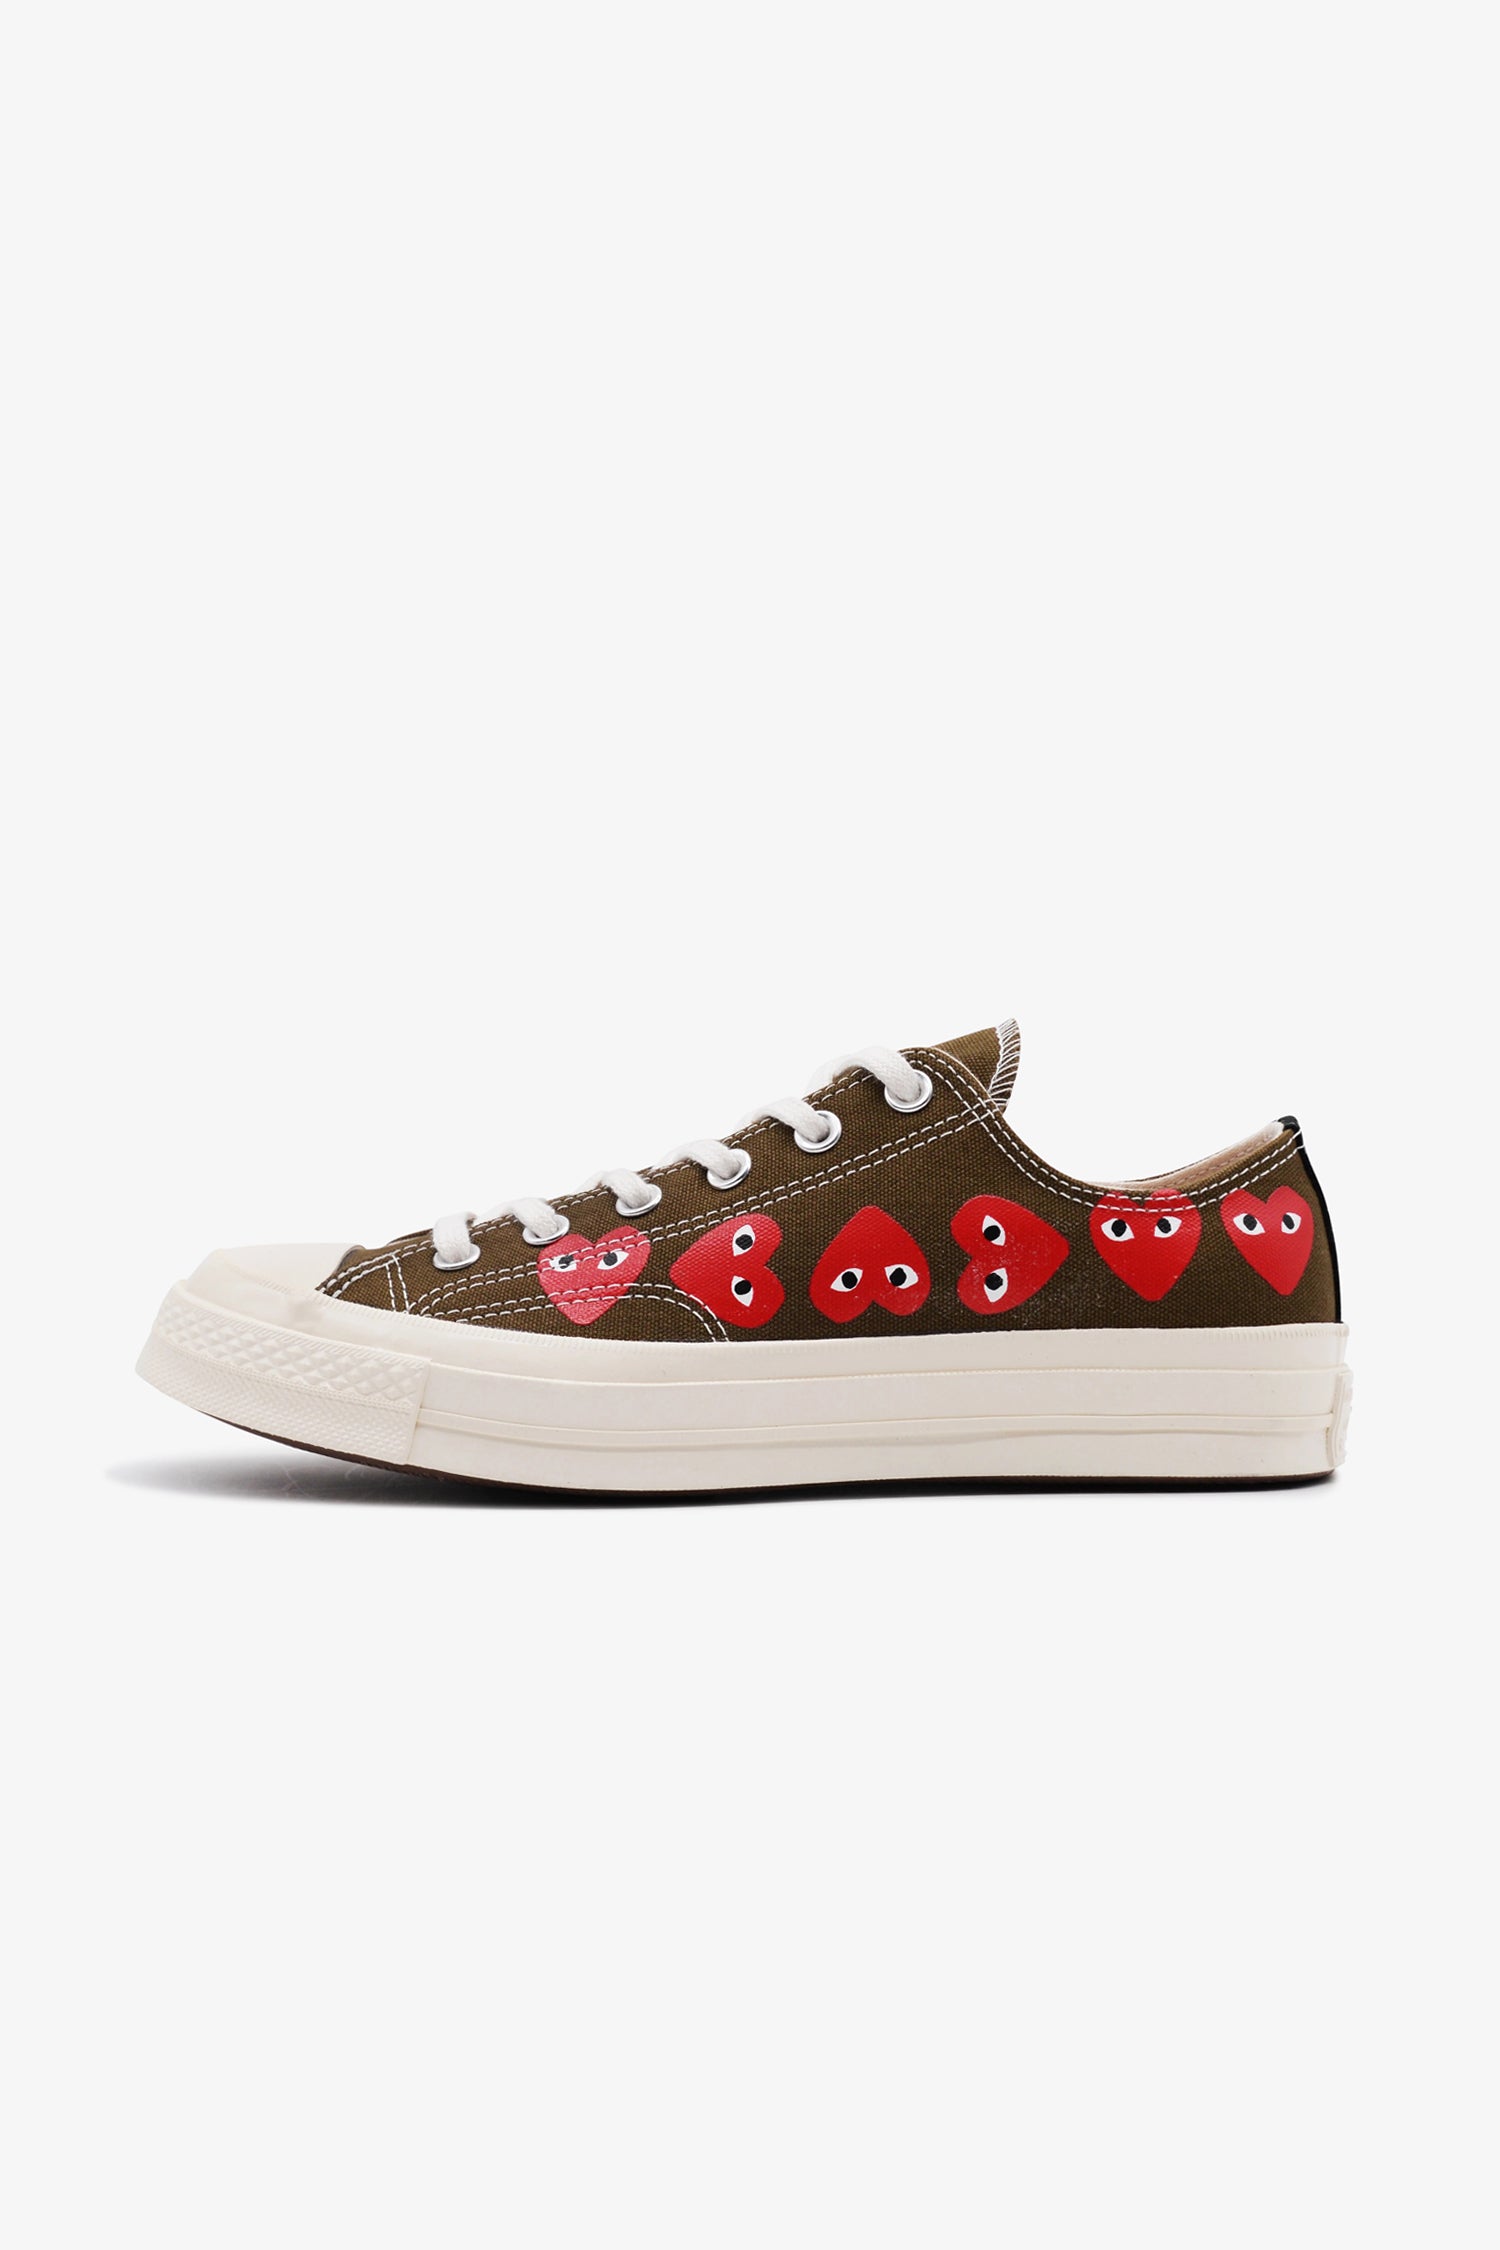 Selectshop FRAME - COMME DES GARCONS PLAY Converse Chuck Taylor All Star '70 Low Multi Red Heart Footwear Dubai